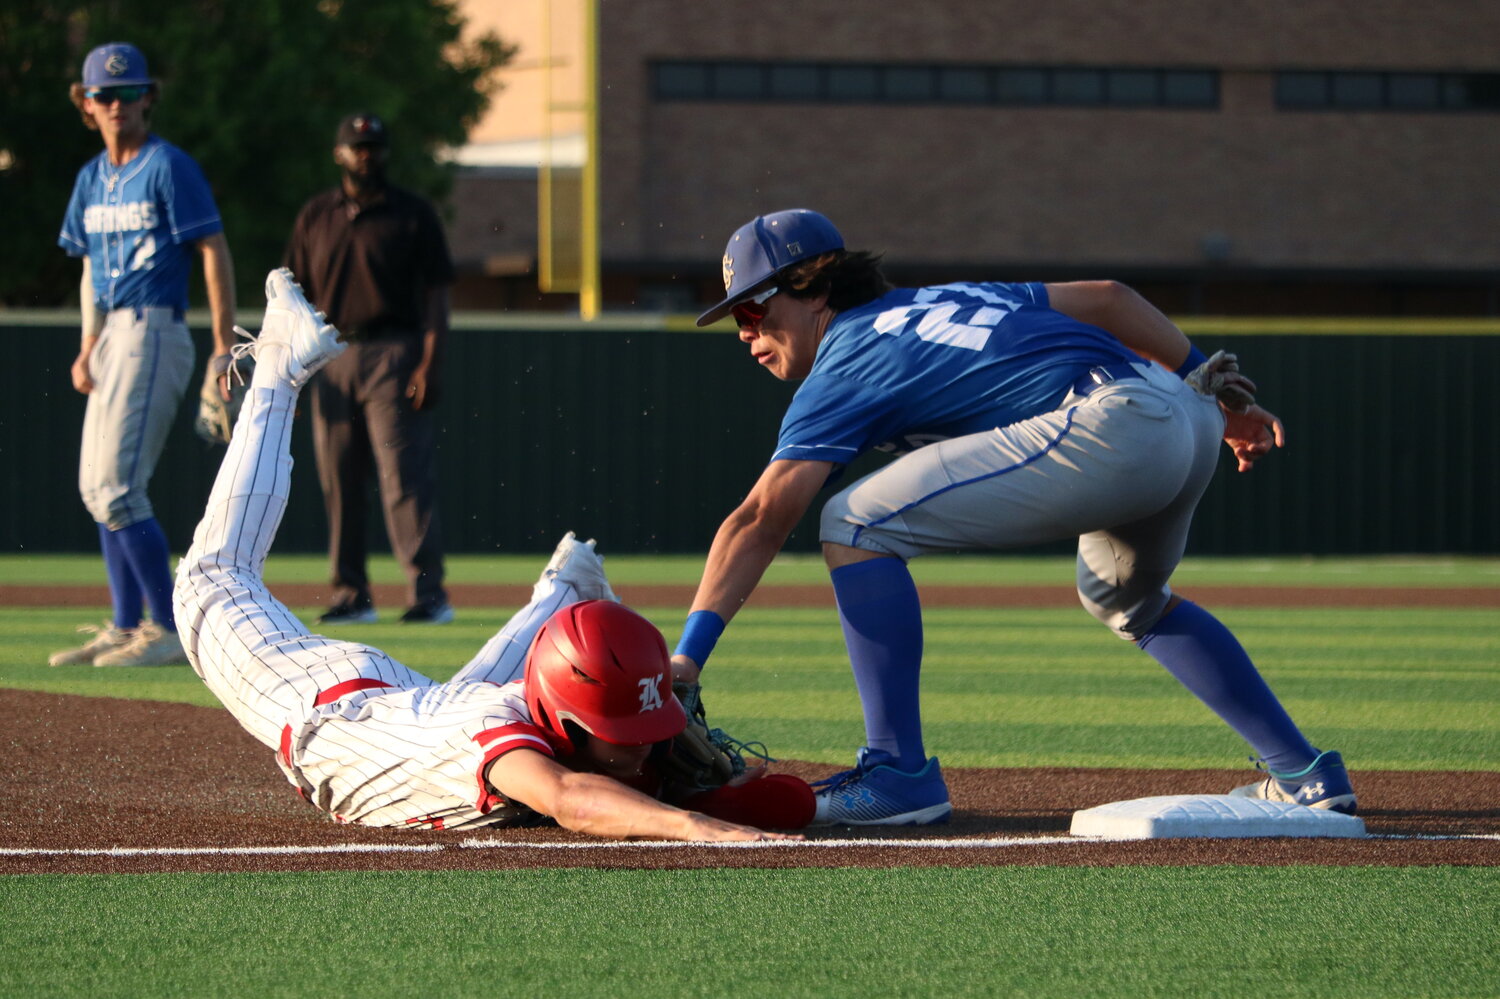 Jacob Hilton tries to slide into third base during during Thursday's Regional Semifinal between Katy and Clear Springs at Langham Creek.